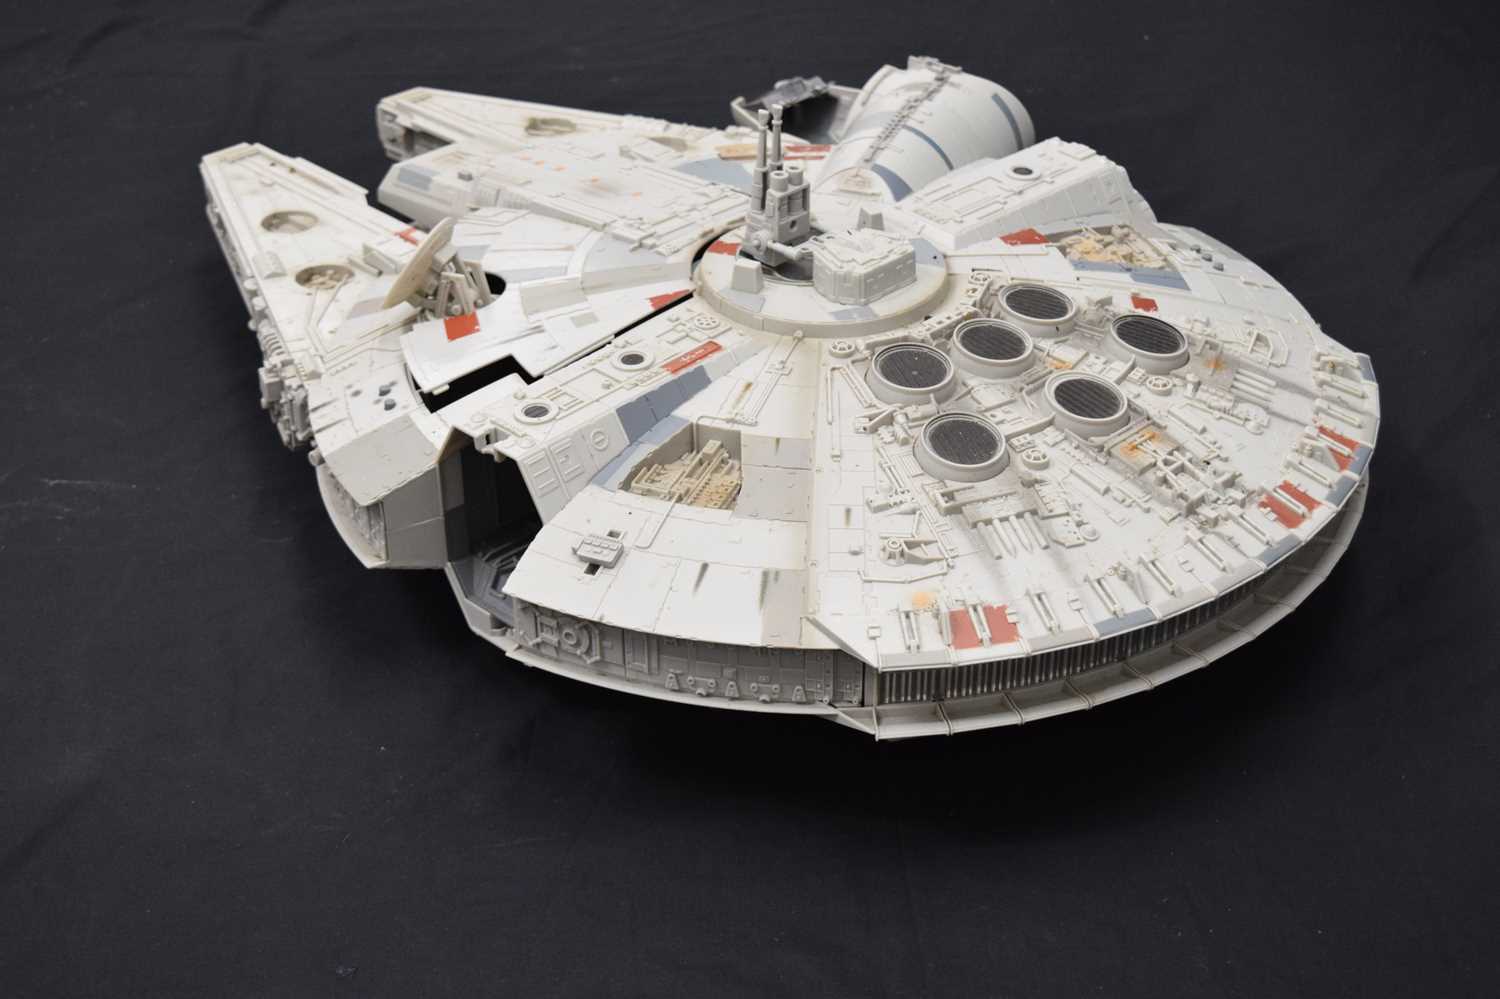 Star Wars - Large 'Millennium Falcon' playset and a large quantity of action figures - Image 2 of 8